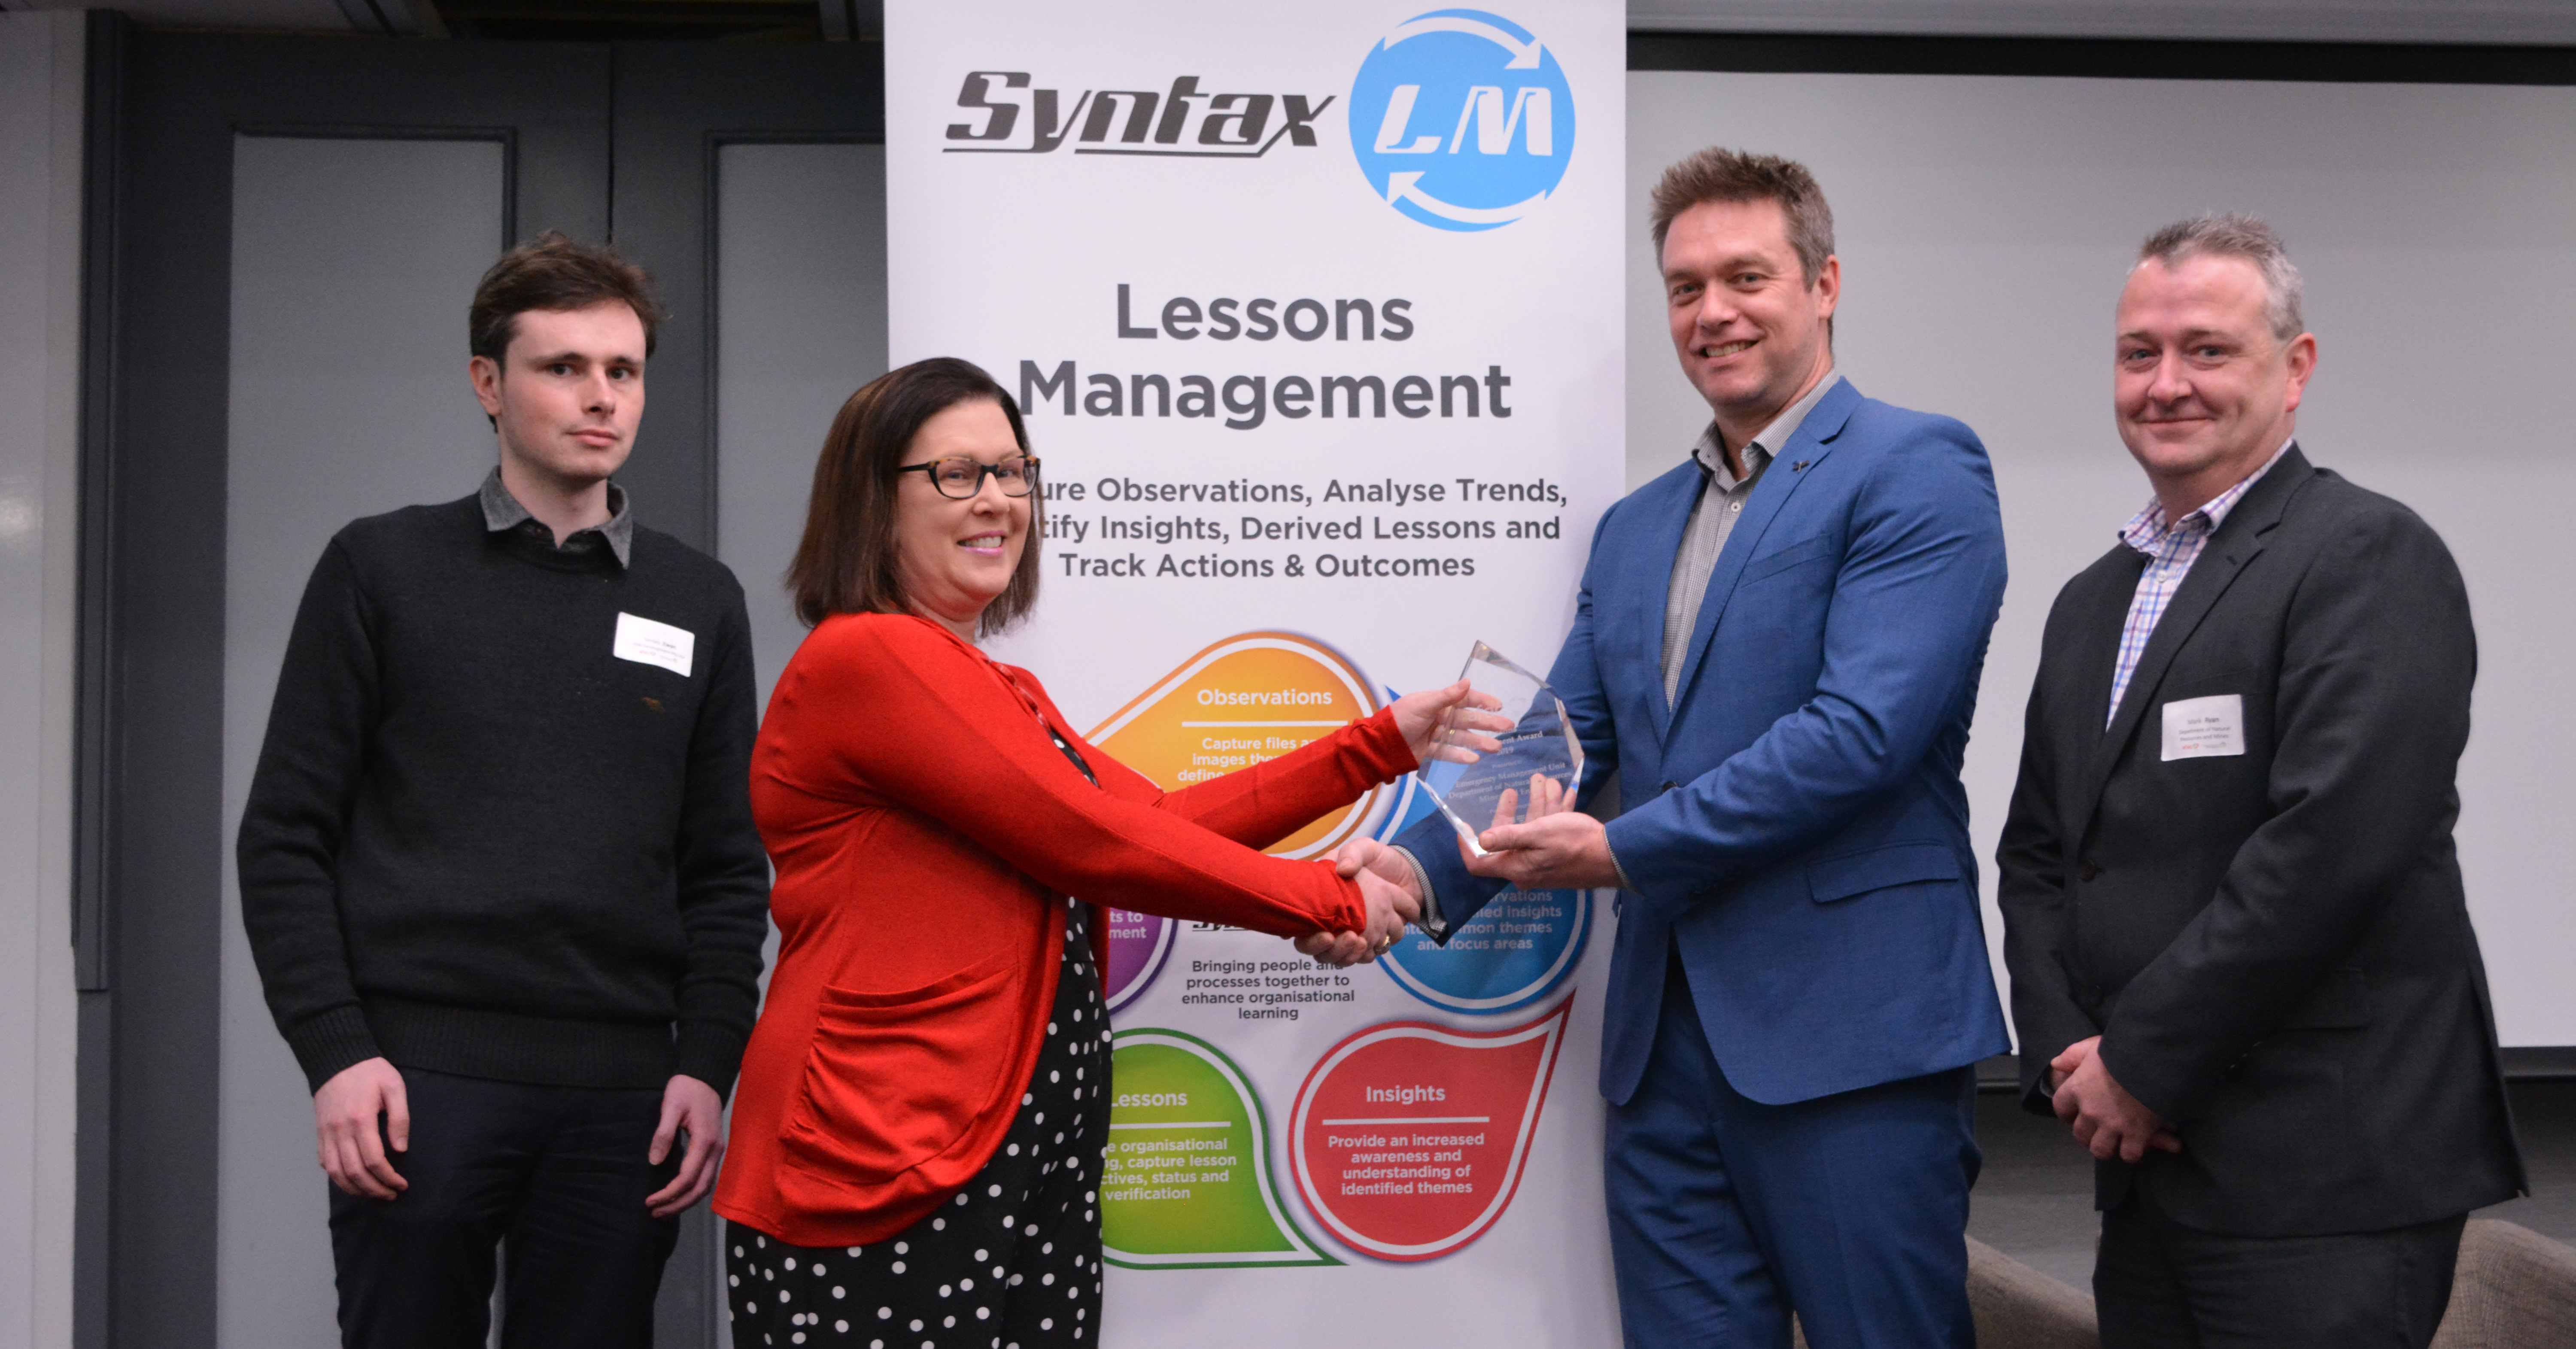 From L to R: James Ewan, Software Engineer, ISW Development; Louise Mills, Service Delivery Manager, ISW Development; and the winners of the 2019 Lessons Management Award, Mark Prime and Mark Ryan from the Emergency Management Unit, Queensland Department of Natural Resources, Mines and Energy.